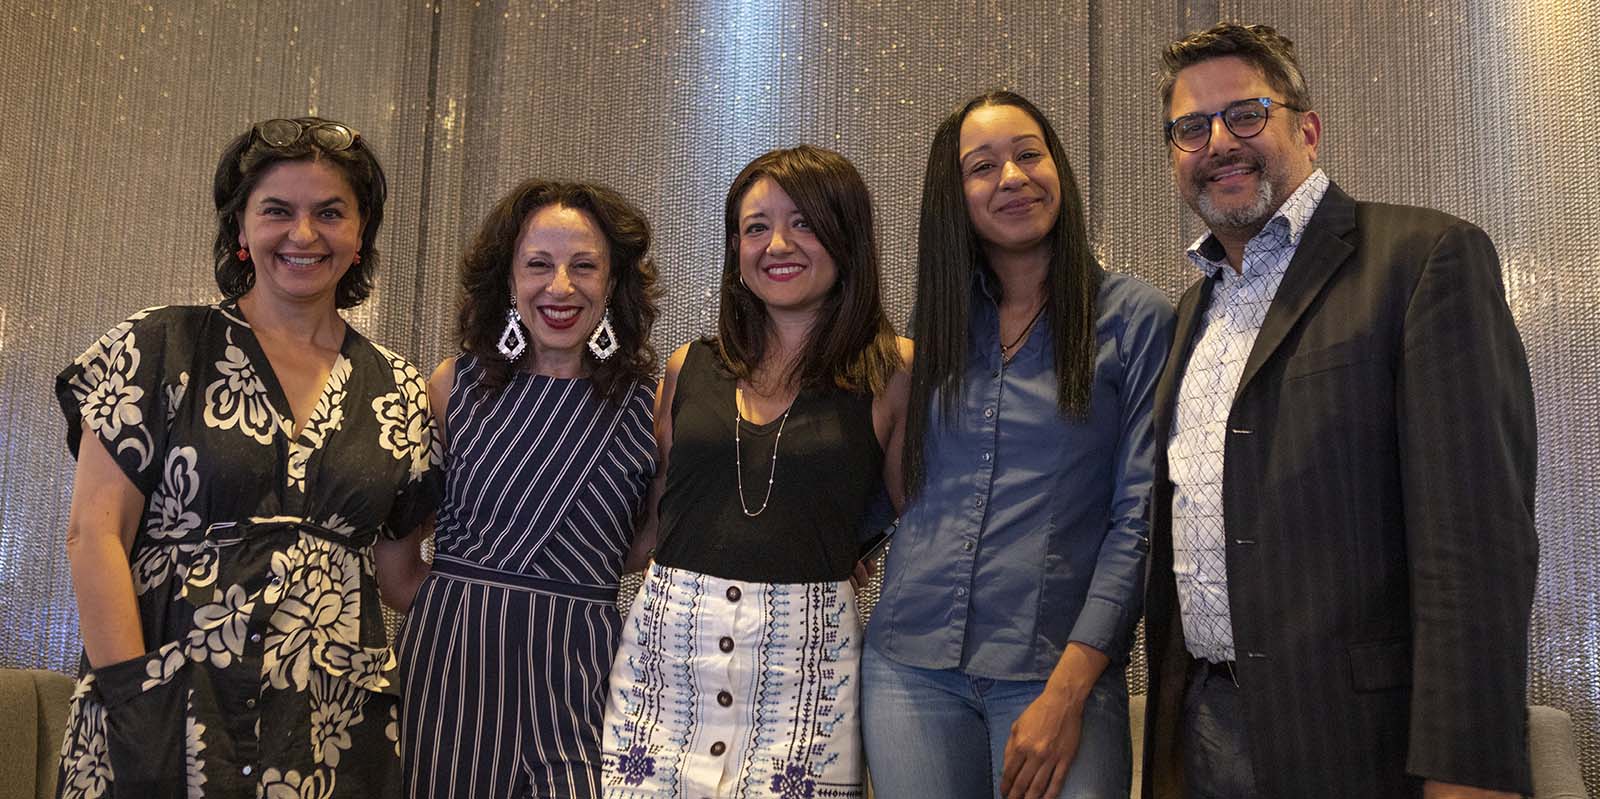 From L to R: HBO's Doris Casap; In The Thick's Maria Hinojosa; Comedy Central, TV Land and Paramount Network's Erika Soto Lamb; HBOs Jessica Leonardo; and In The Thick's Julio Ricardo Varela after a live taping of the 'In The Thick Podcast' at Viacom's Times Square headquarters on June 4, 2019.